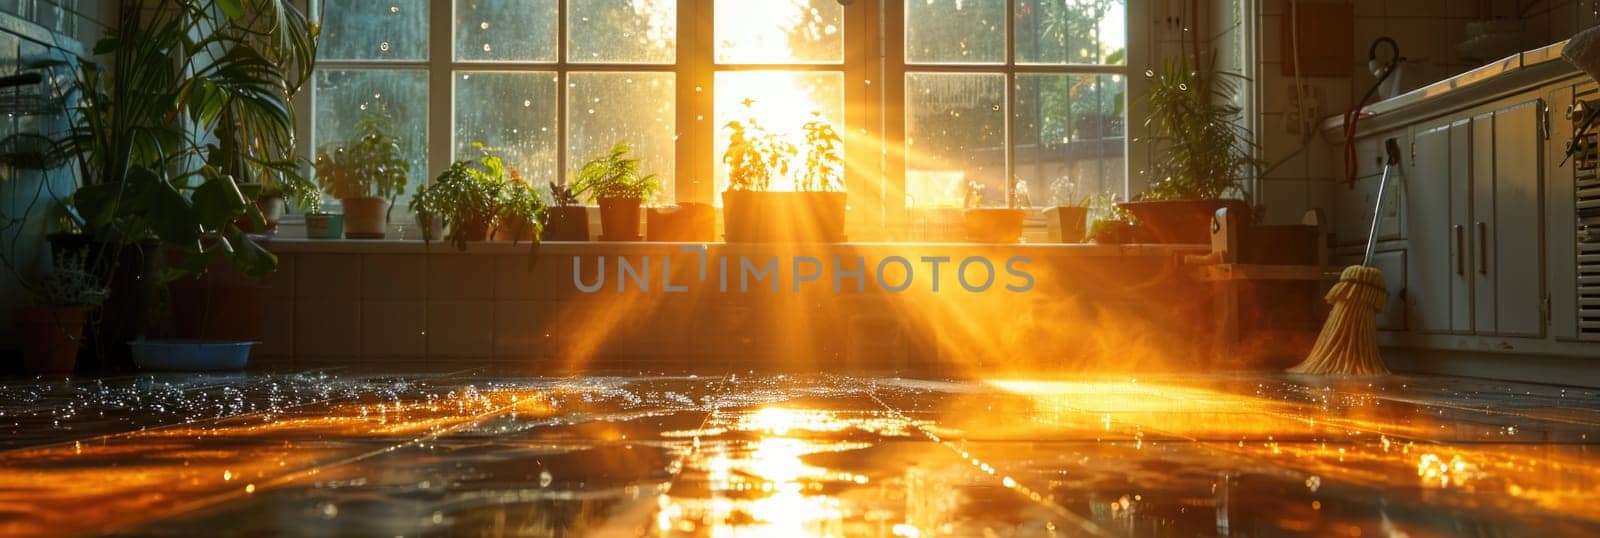 Bright Sunlight Streaming Through Window in Room by but_photo